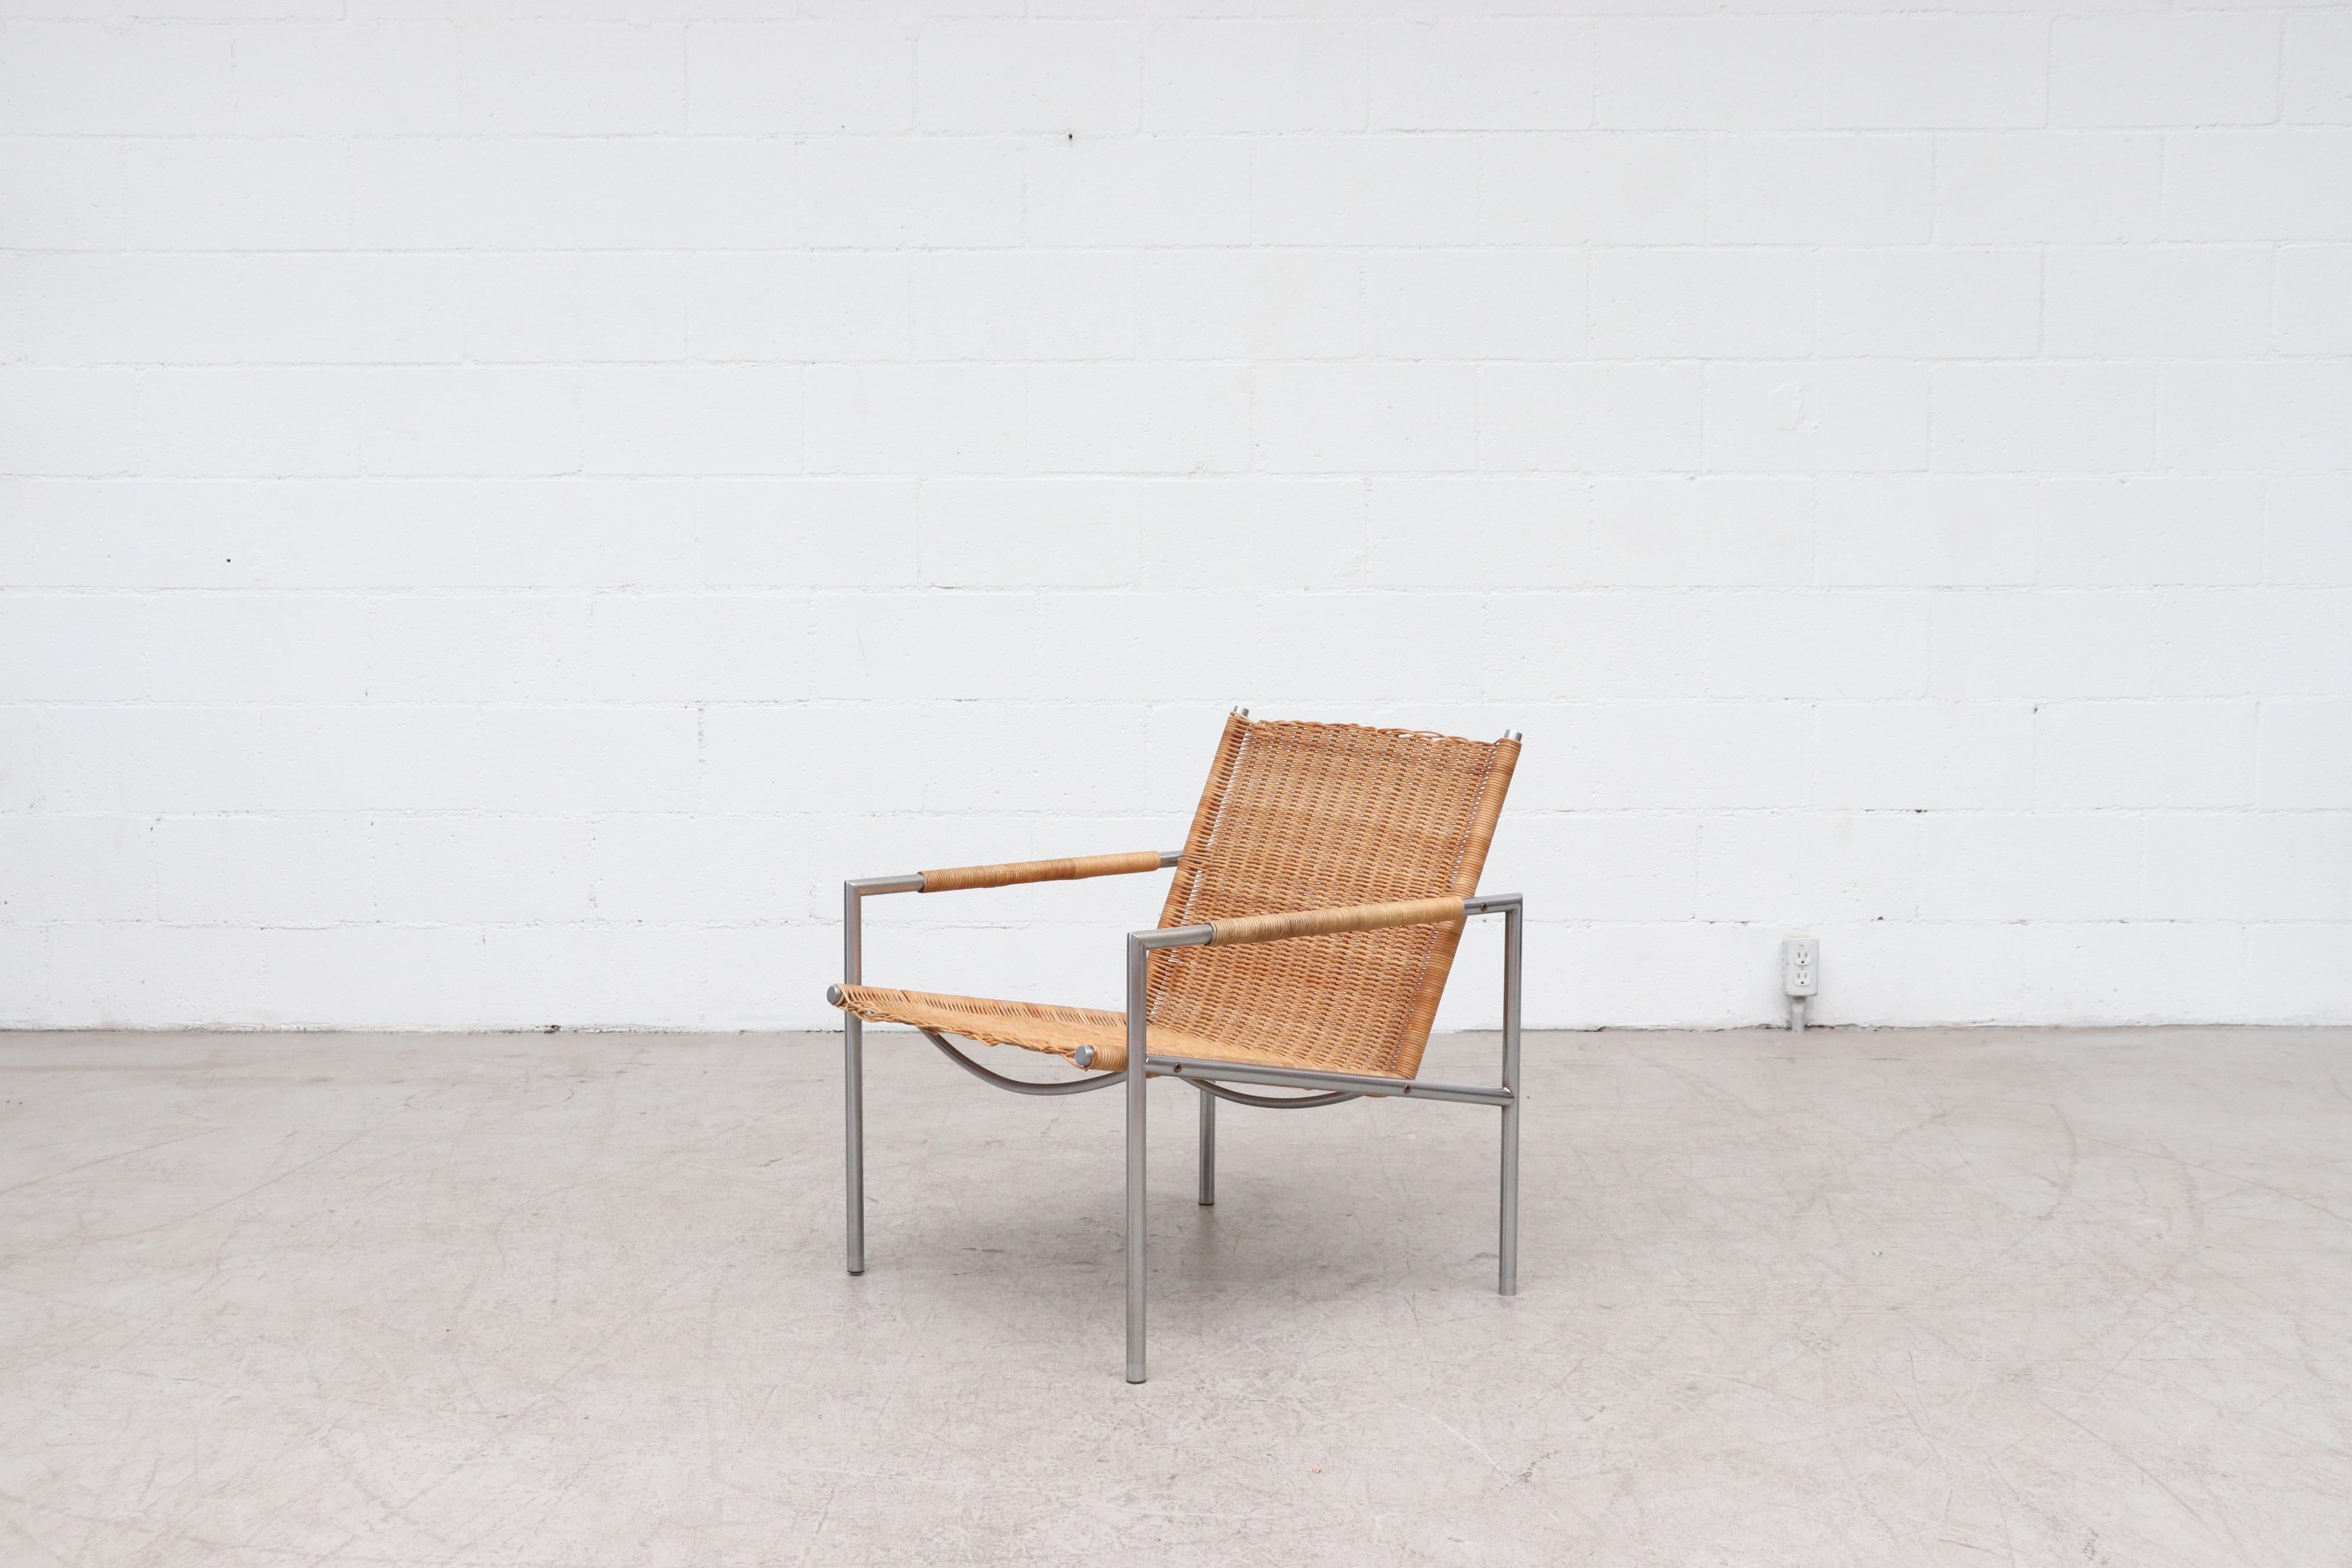 One of Martin Visser's well-known chrome and rattan lounge chair designs of the 1960s with Tubular chrome metal frame and rattan wrap detailing on arm rests. Martin Visser began working for Spectrum in 1954 as designer and head of collection. He had